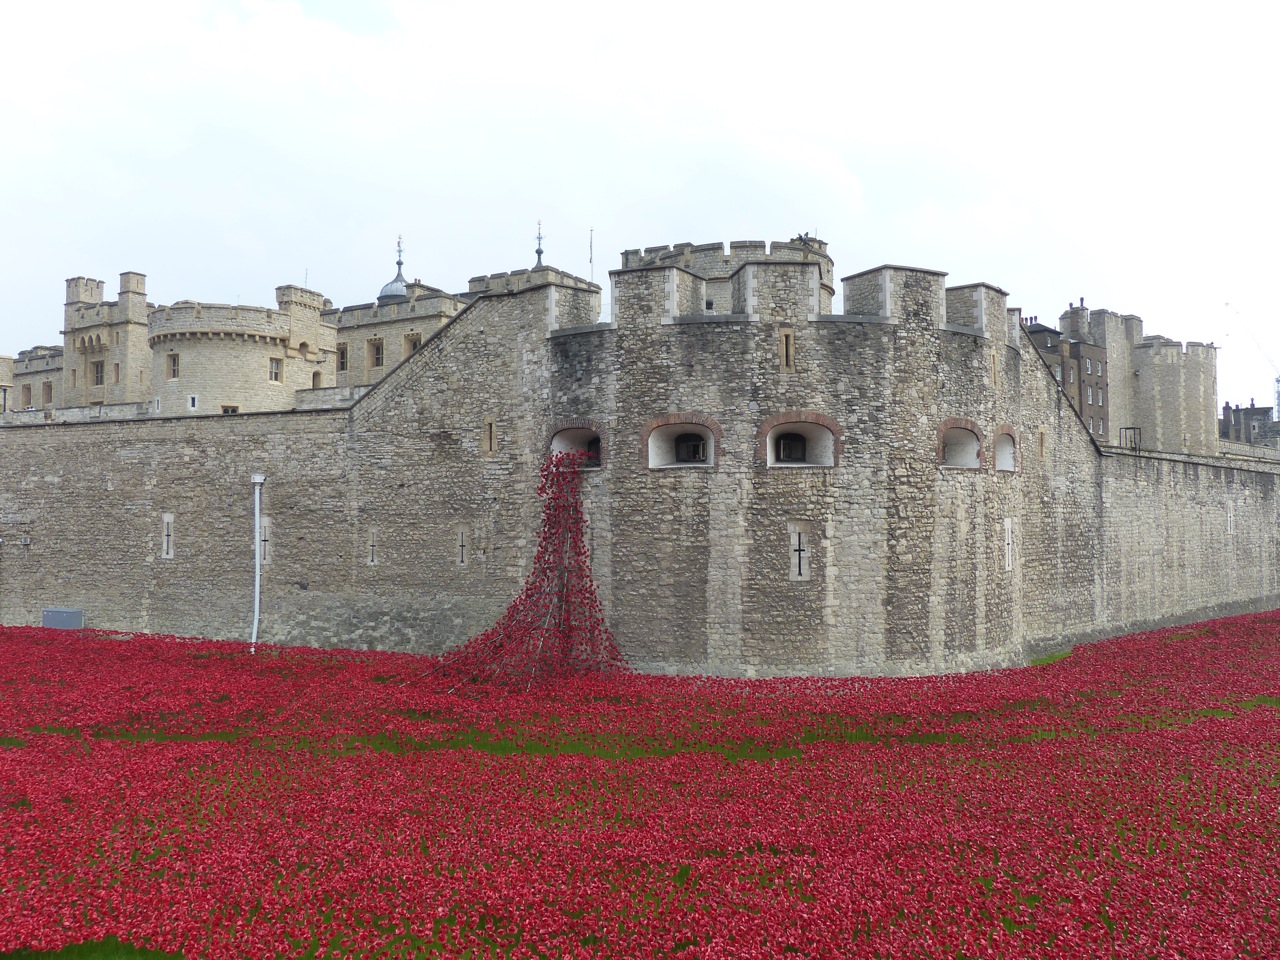 "Blood Swept Lands and Seas of Red" at the Tower of London